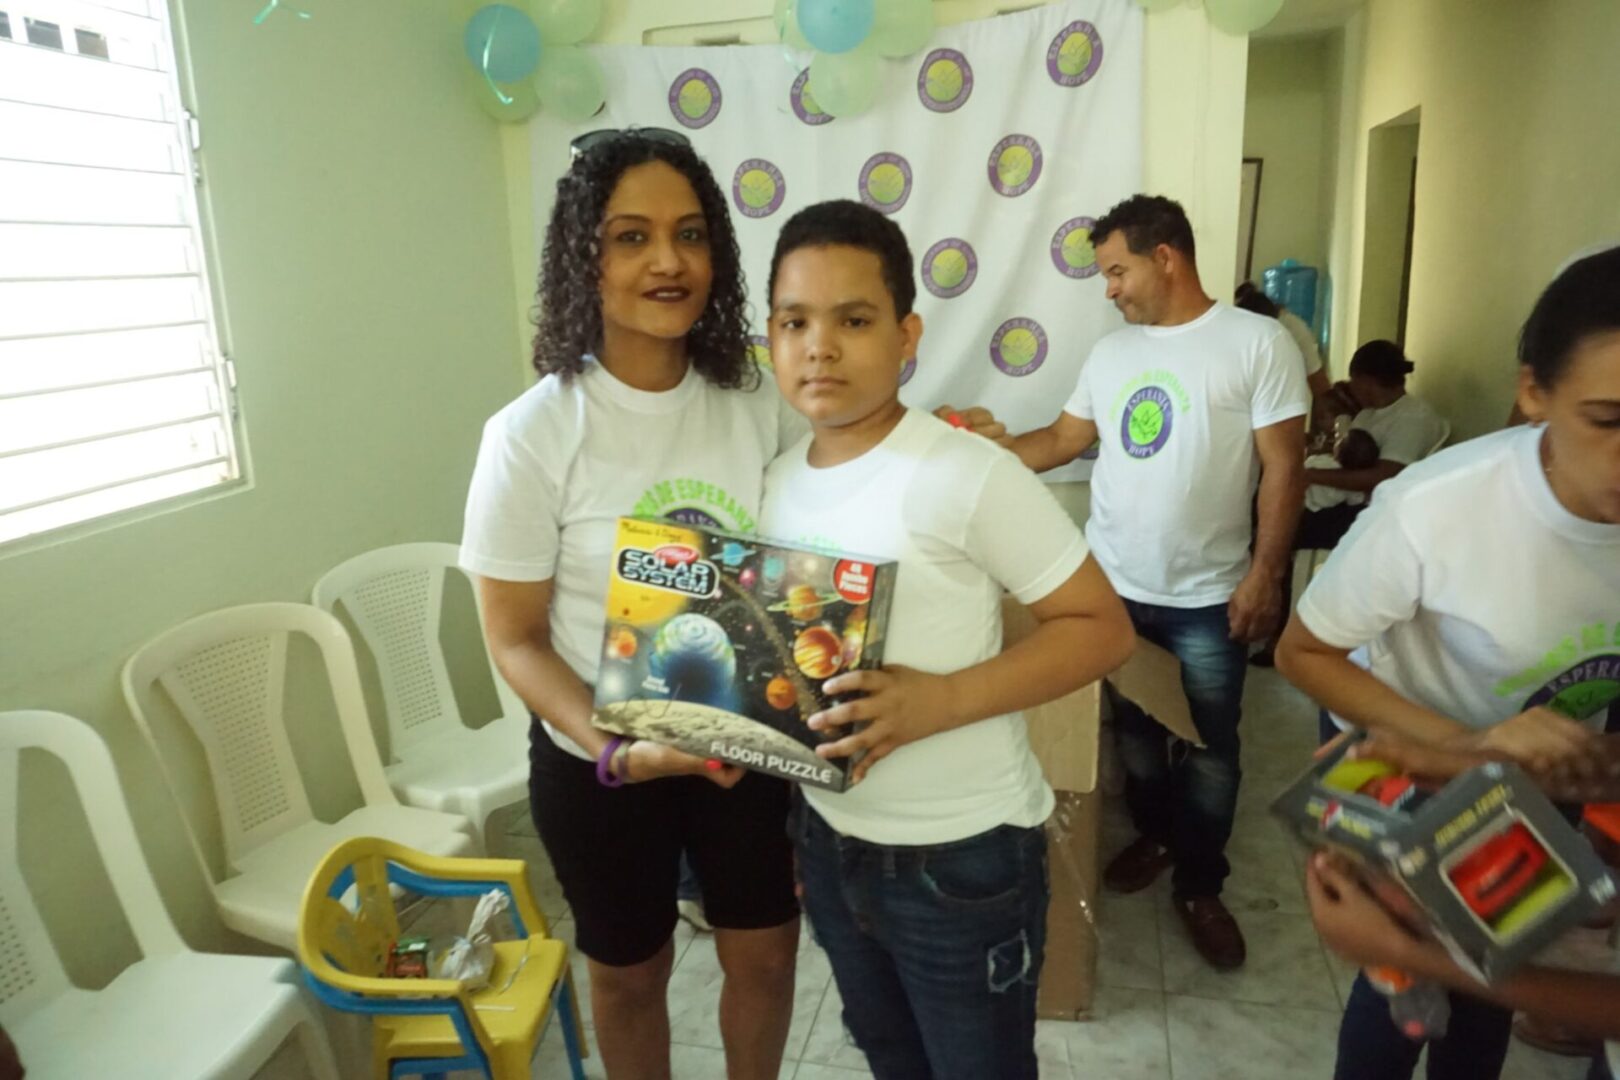 A staff and a boy holding a box of solar system toy